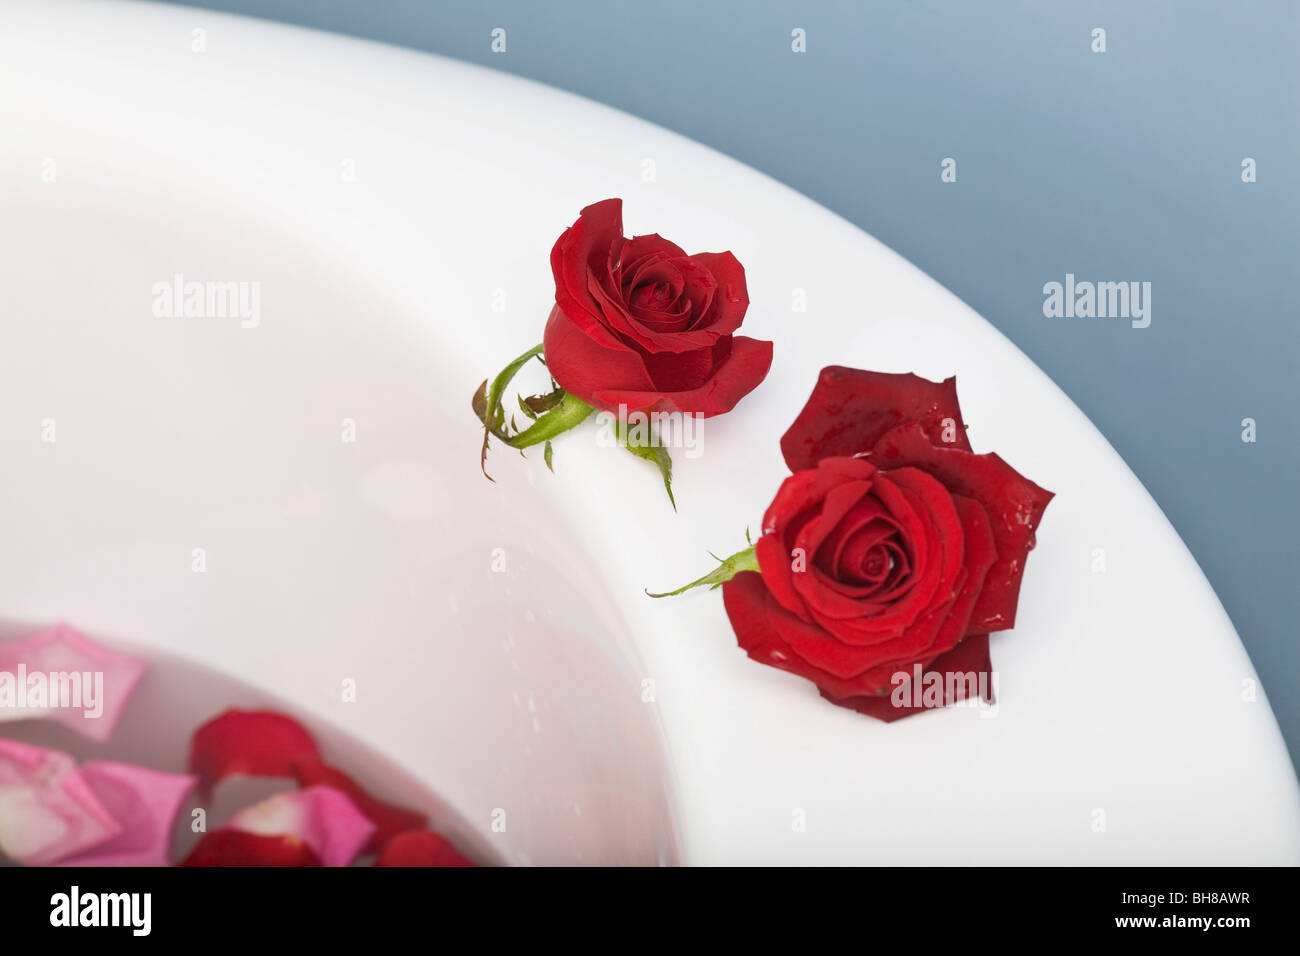 Two roses on the edge of a bathtub Stock Photo